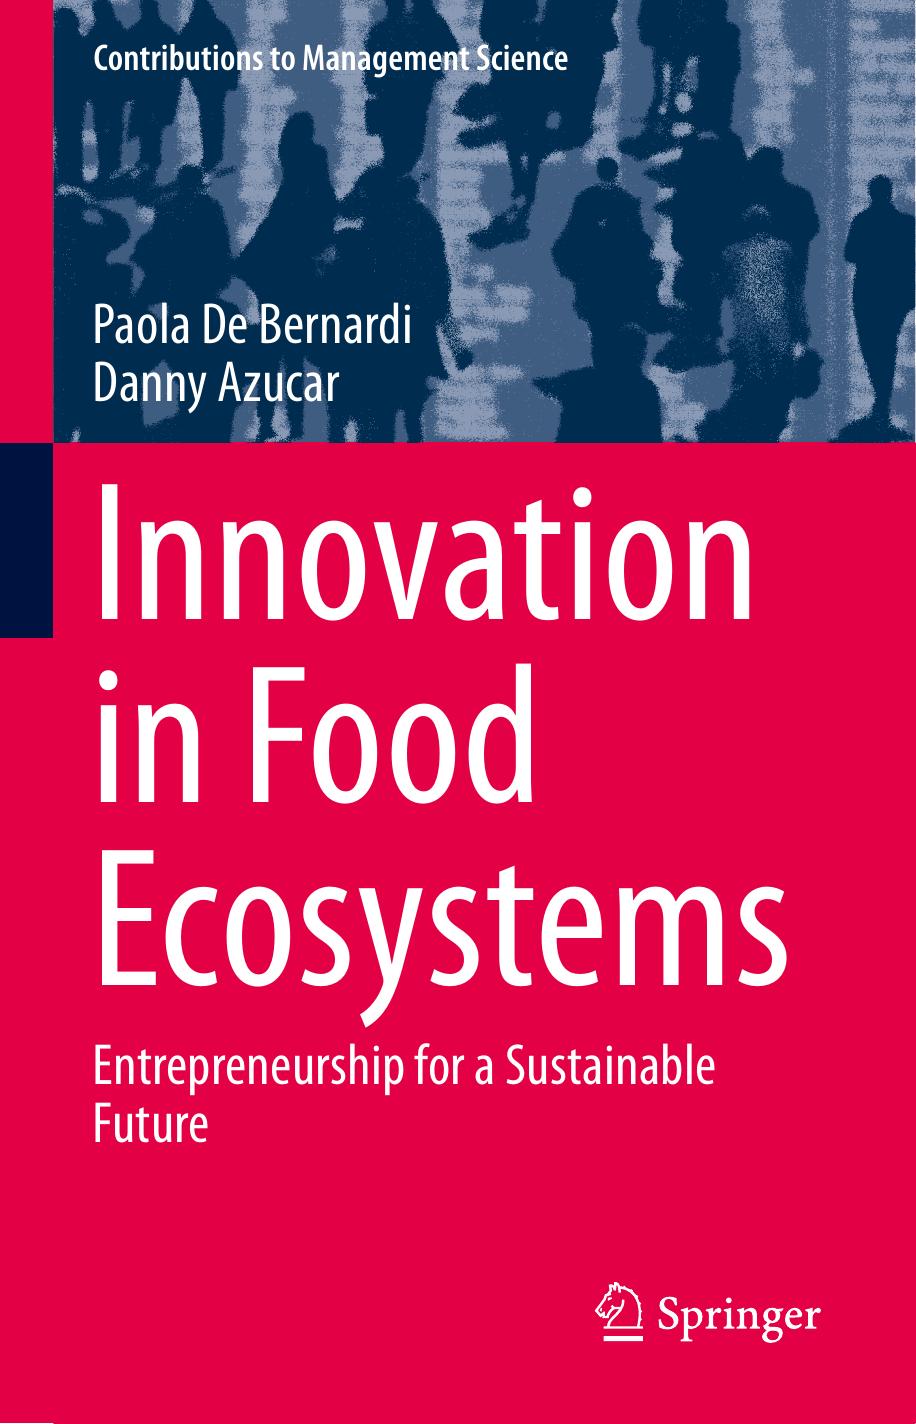 Innovation in Food Ecosystems  Entrepreneurship for a Sustainable Future-Springer International Publishing (2020)